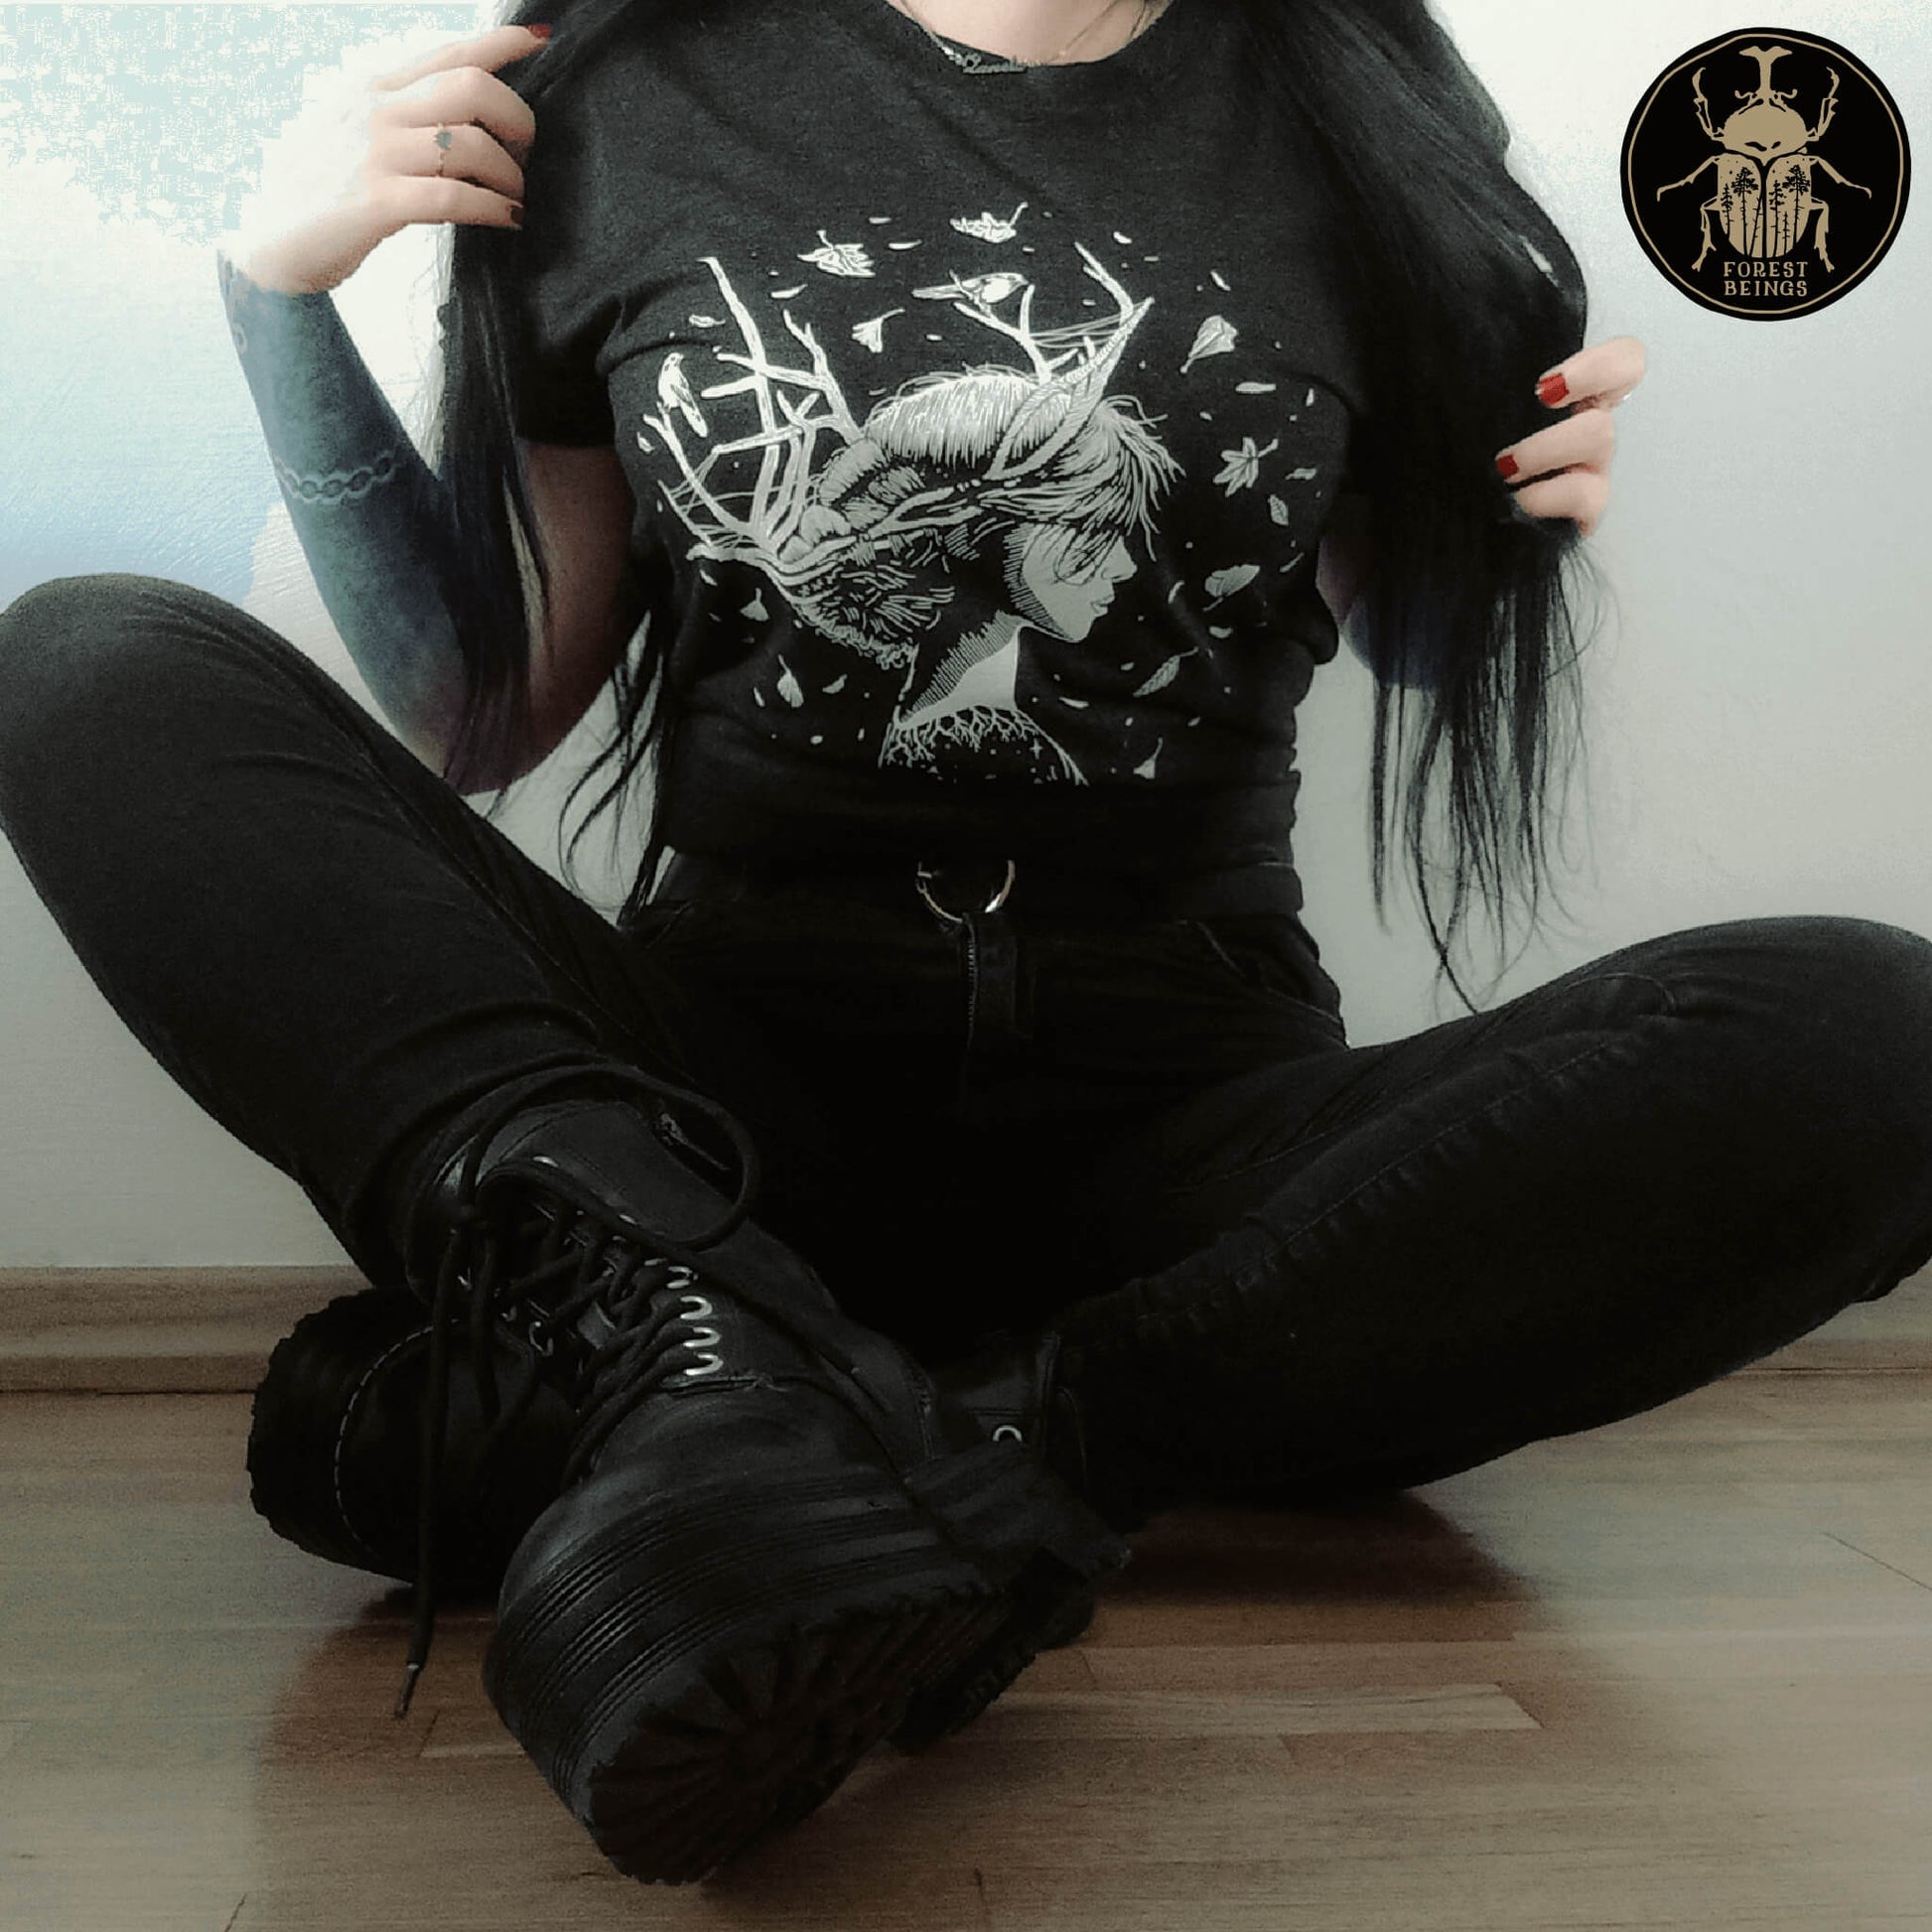 Gothic girl with tattoos and wearing all black. The outfit is a soft goth aesthetic. She is wearing a witchy t-shirt.